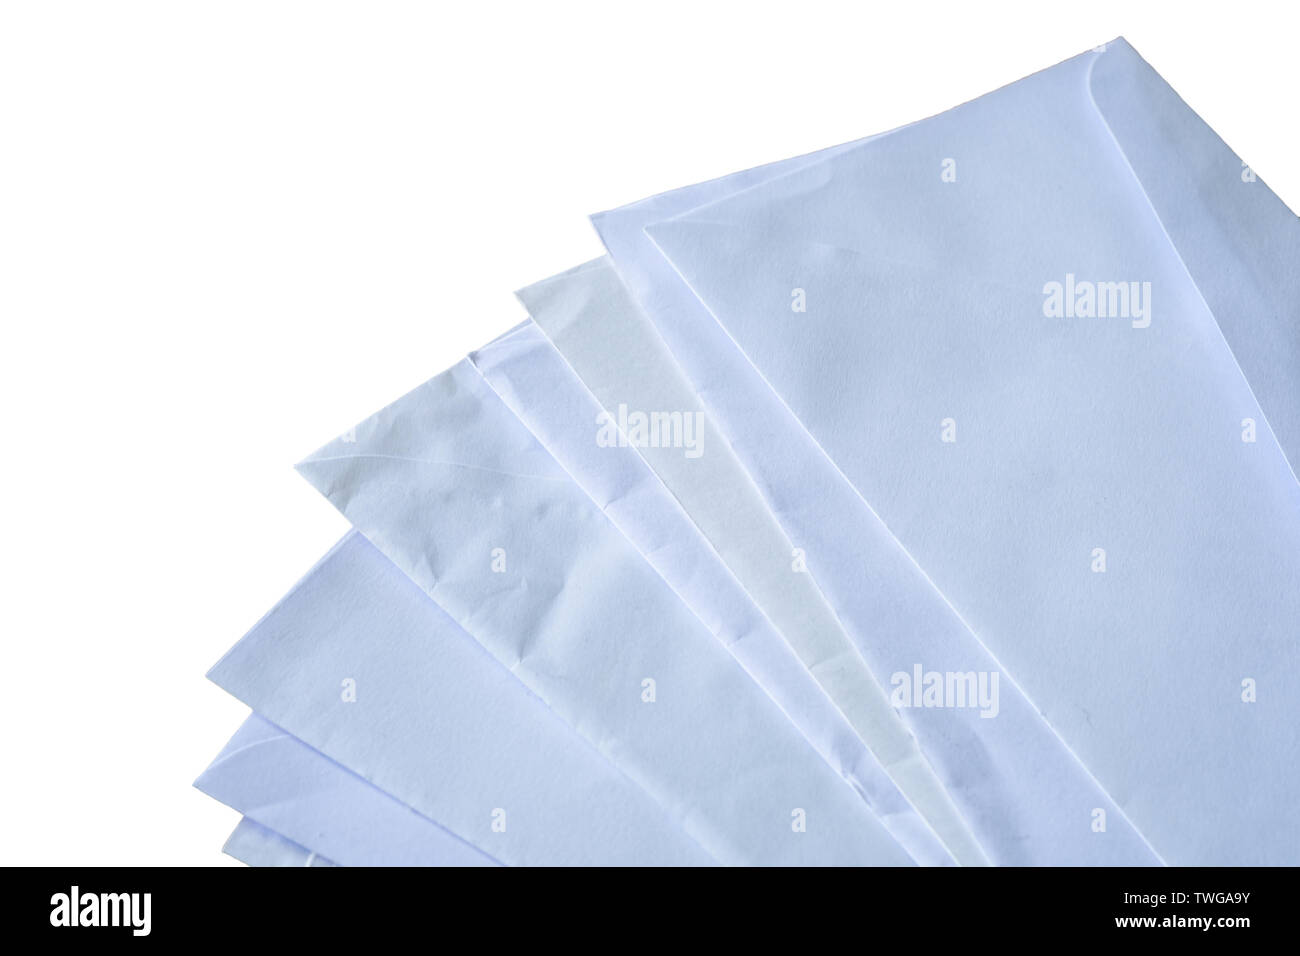 Documents and envelopes stacked on white background Stock Photo